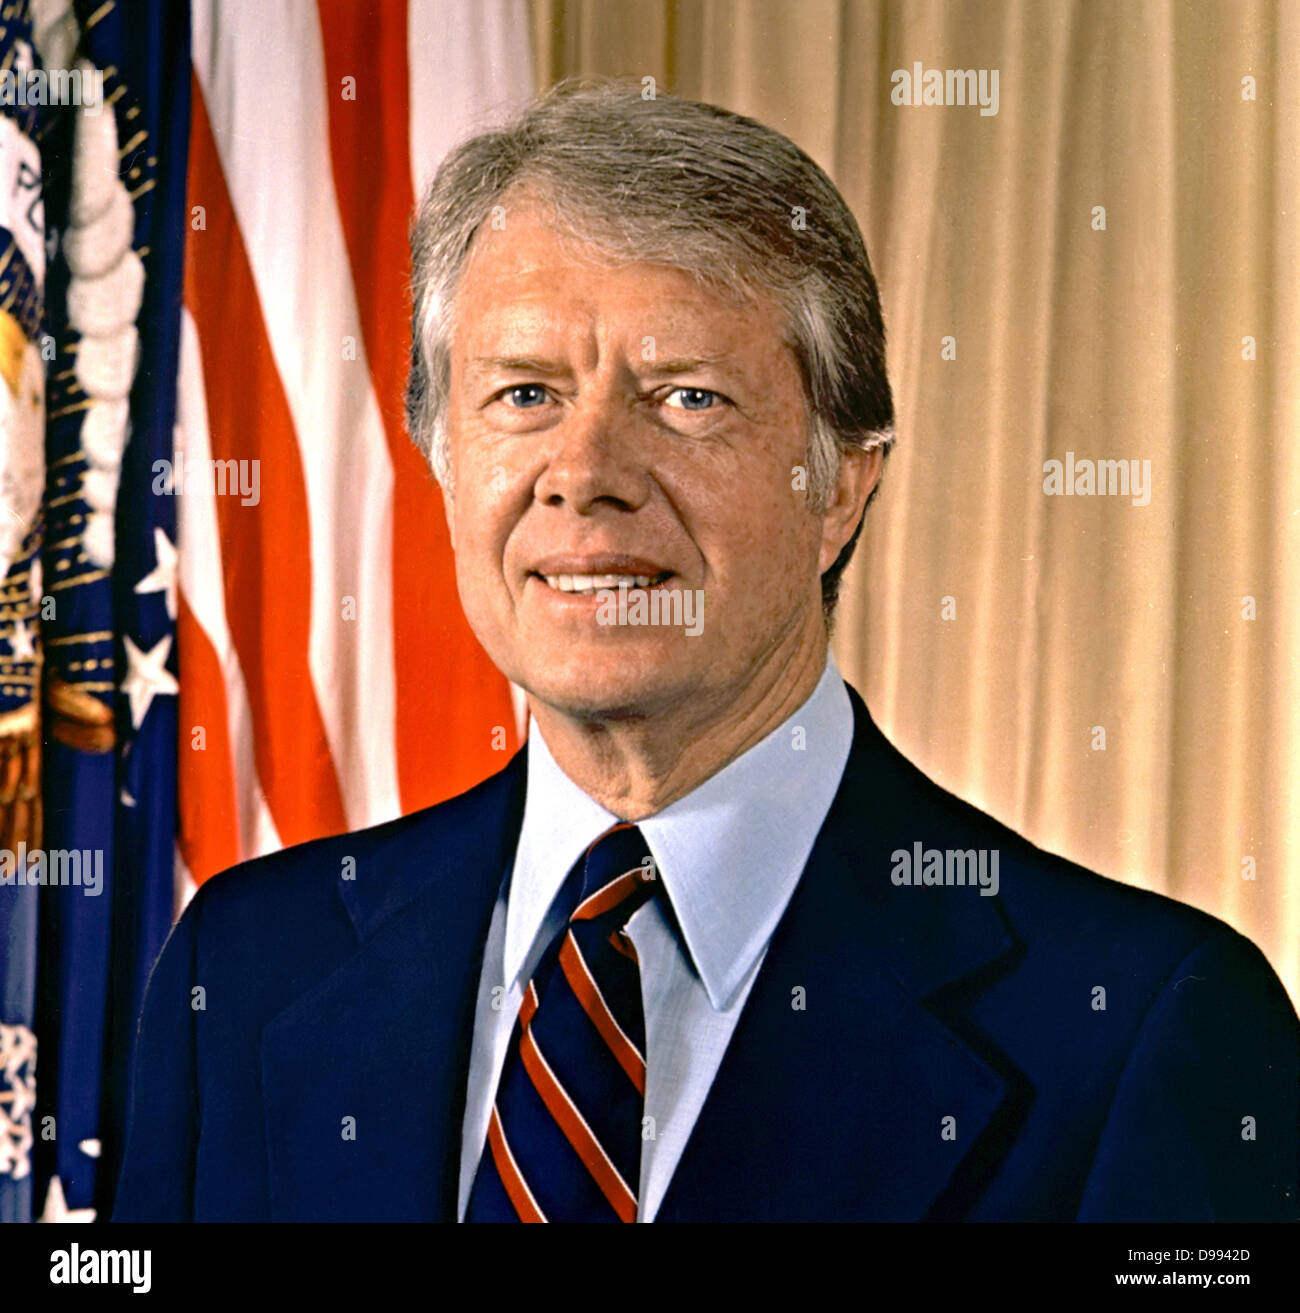 James Earl 'Jimmy' Carter, Jr. (born 1924) 39th President of the United States from 1977 to 1981. Governor of Georgia 1971-1975. Head-and-shoulders portrait with stars-and-stripes in background. American Politician Democrat Stock Photo